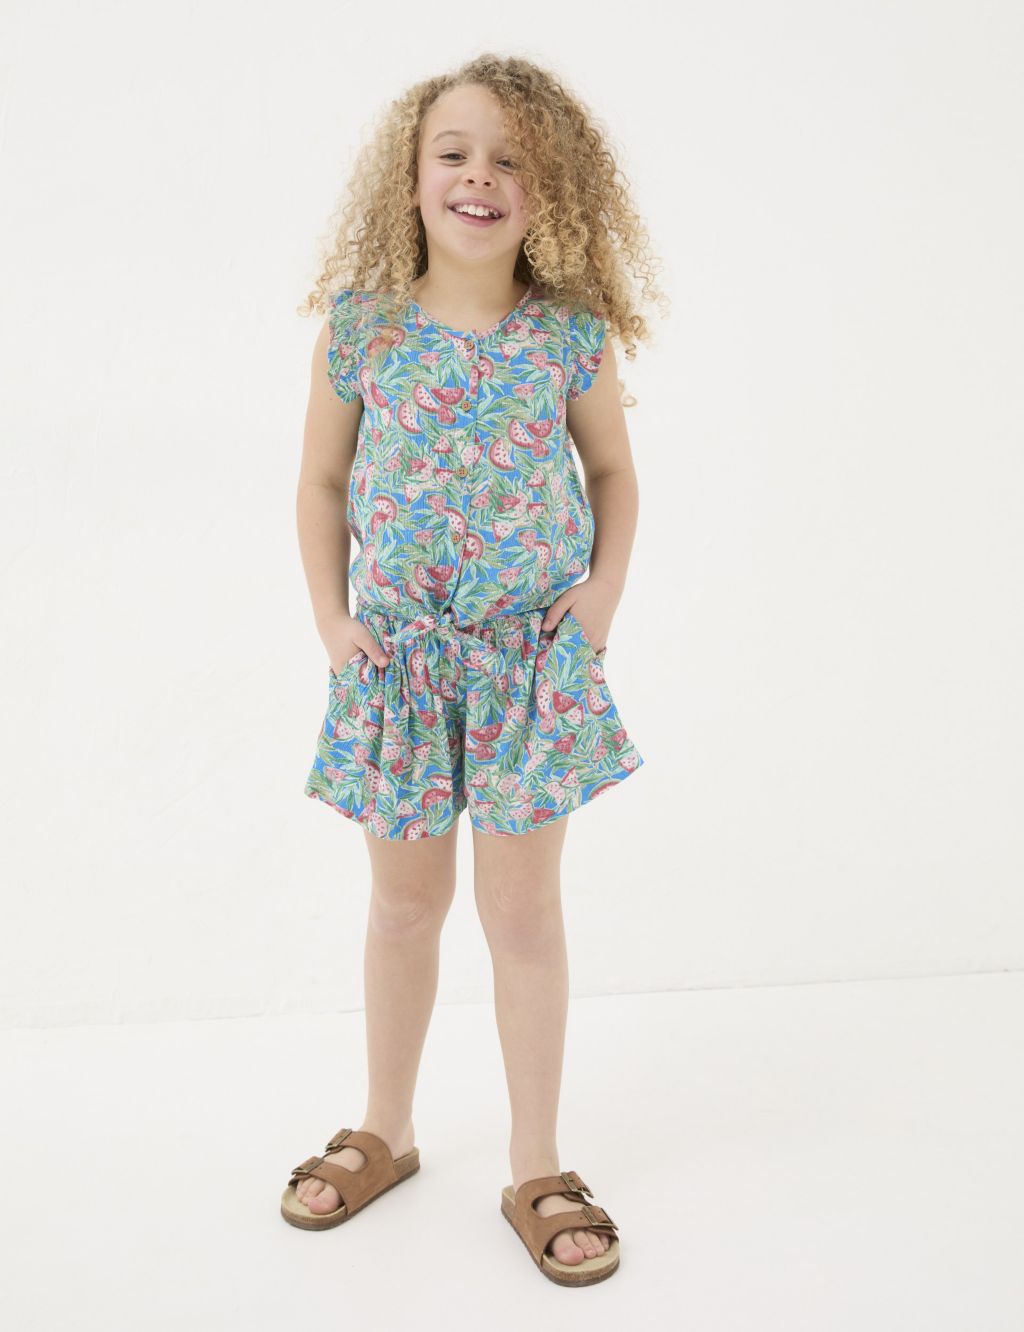 2pc Watermelon Print Top & Bottom Outfit (3-13 Yrs)